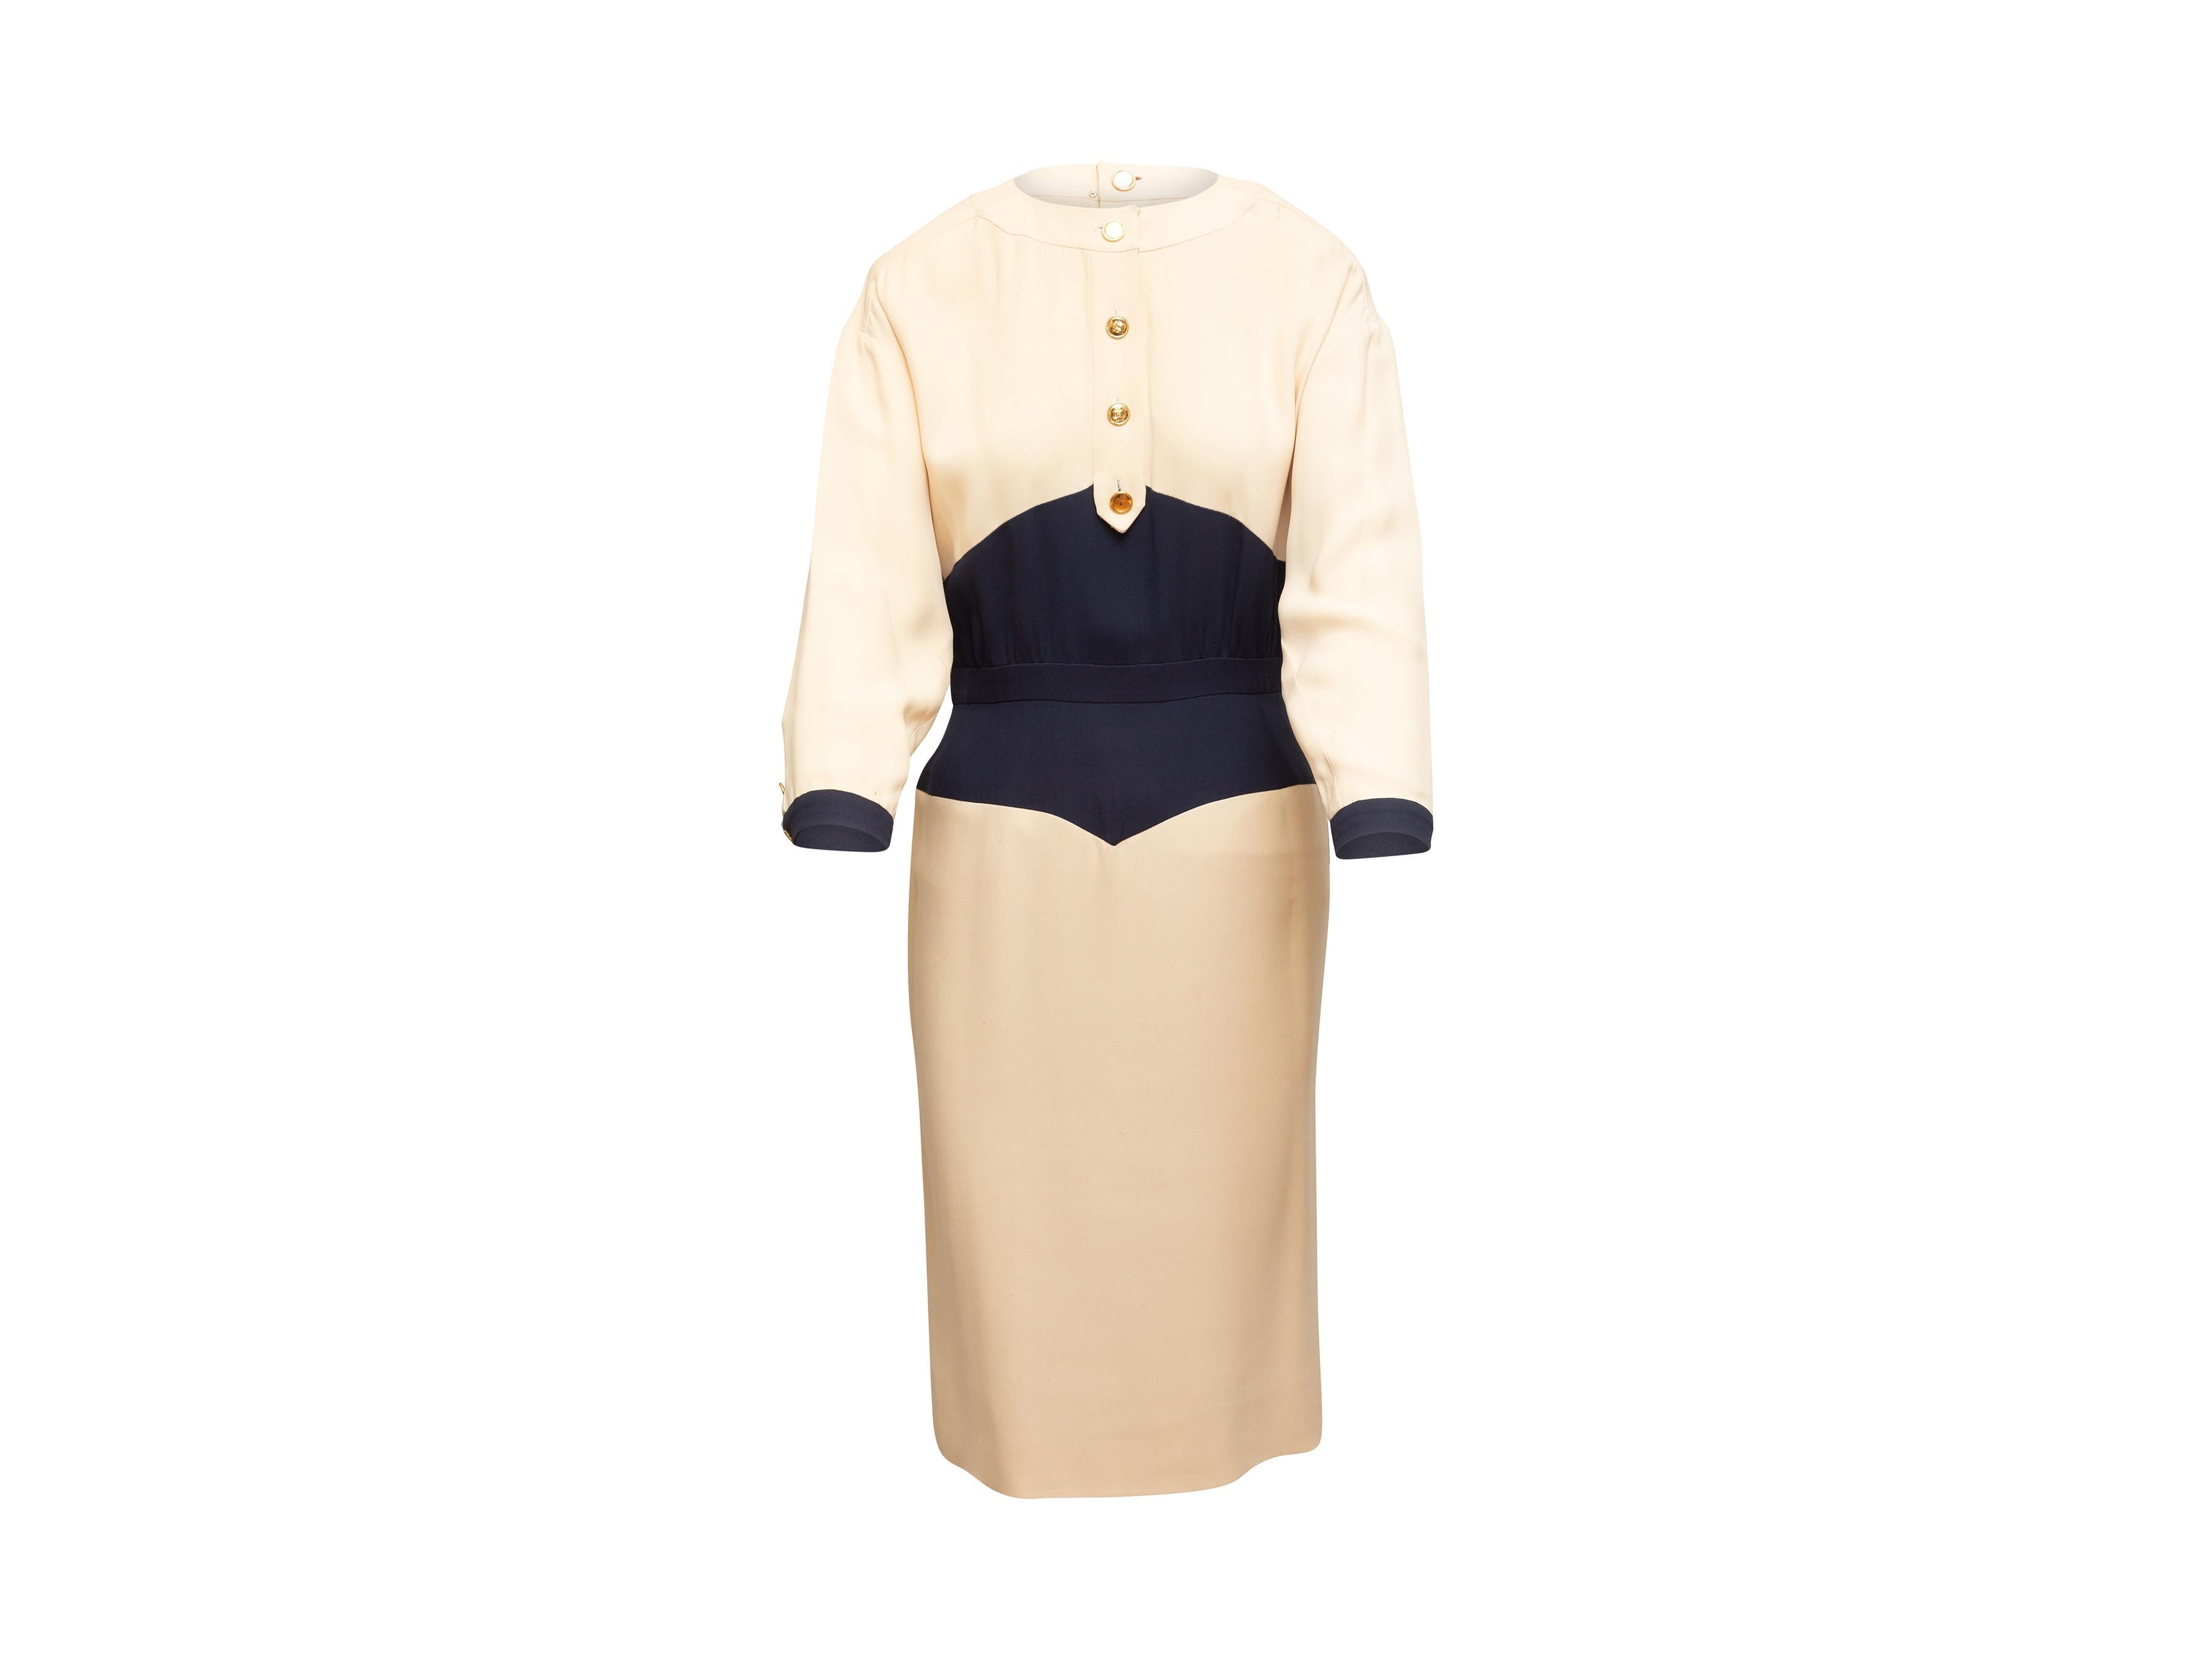 Product details: Vintage cream and navy long sleeve dress by Chanel Boutique. Crew neck. Buttons at front bodice. Zip closure at center back. 38